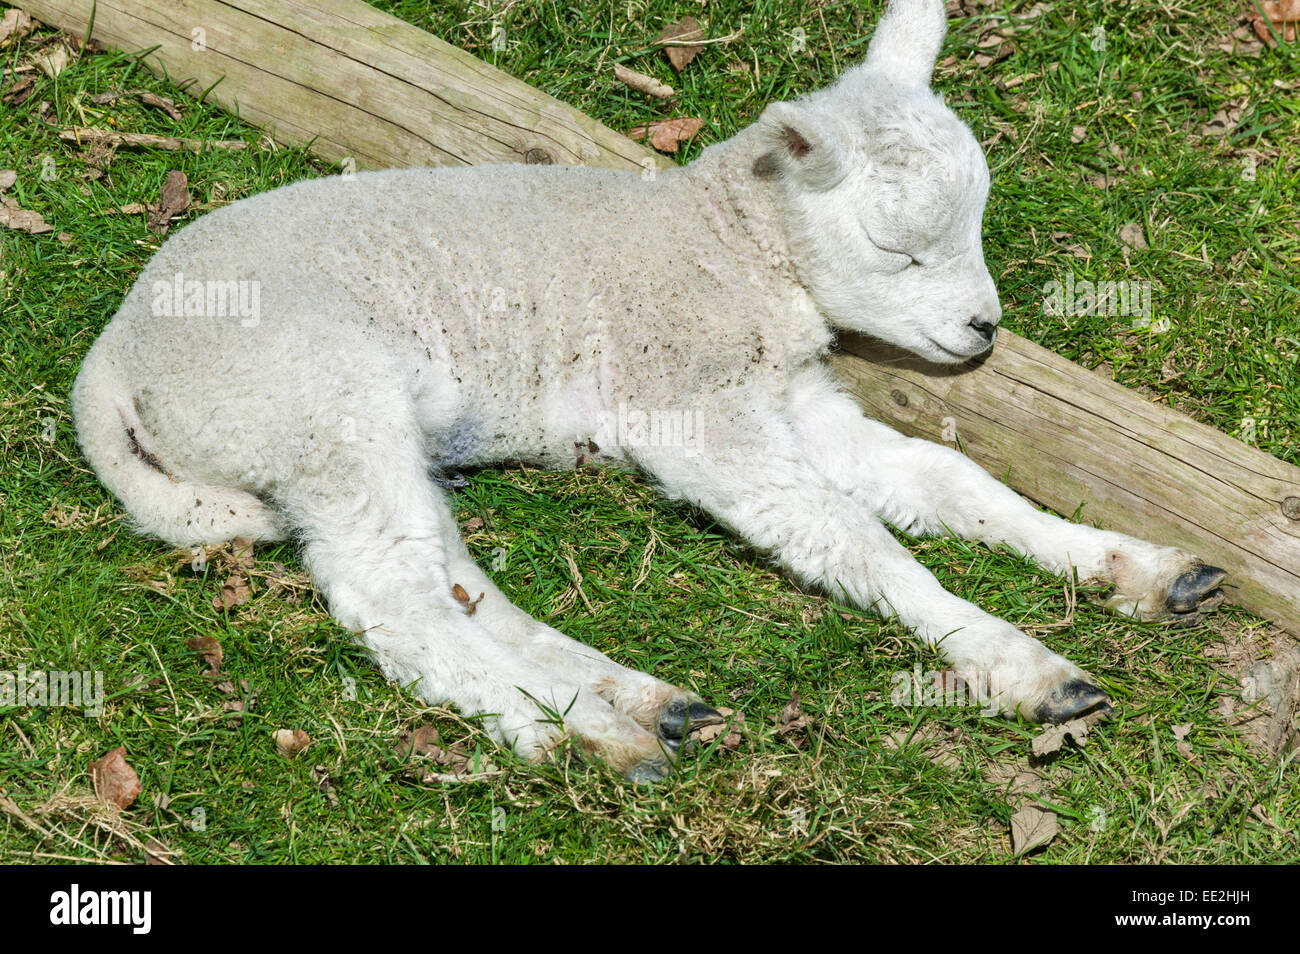 YOUNG LAMB IN SPRINGTIME SLEEPING AGAINST A WOODEN POST Stock Photo